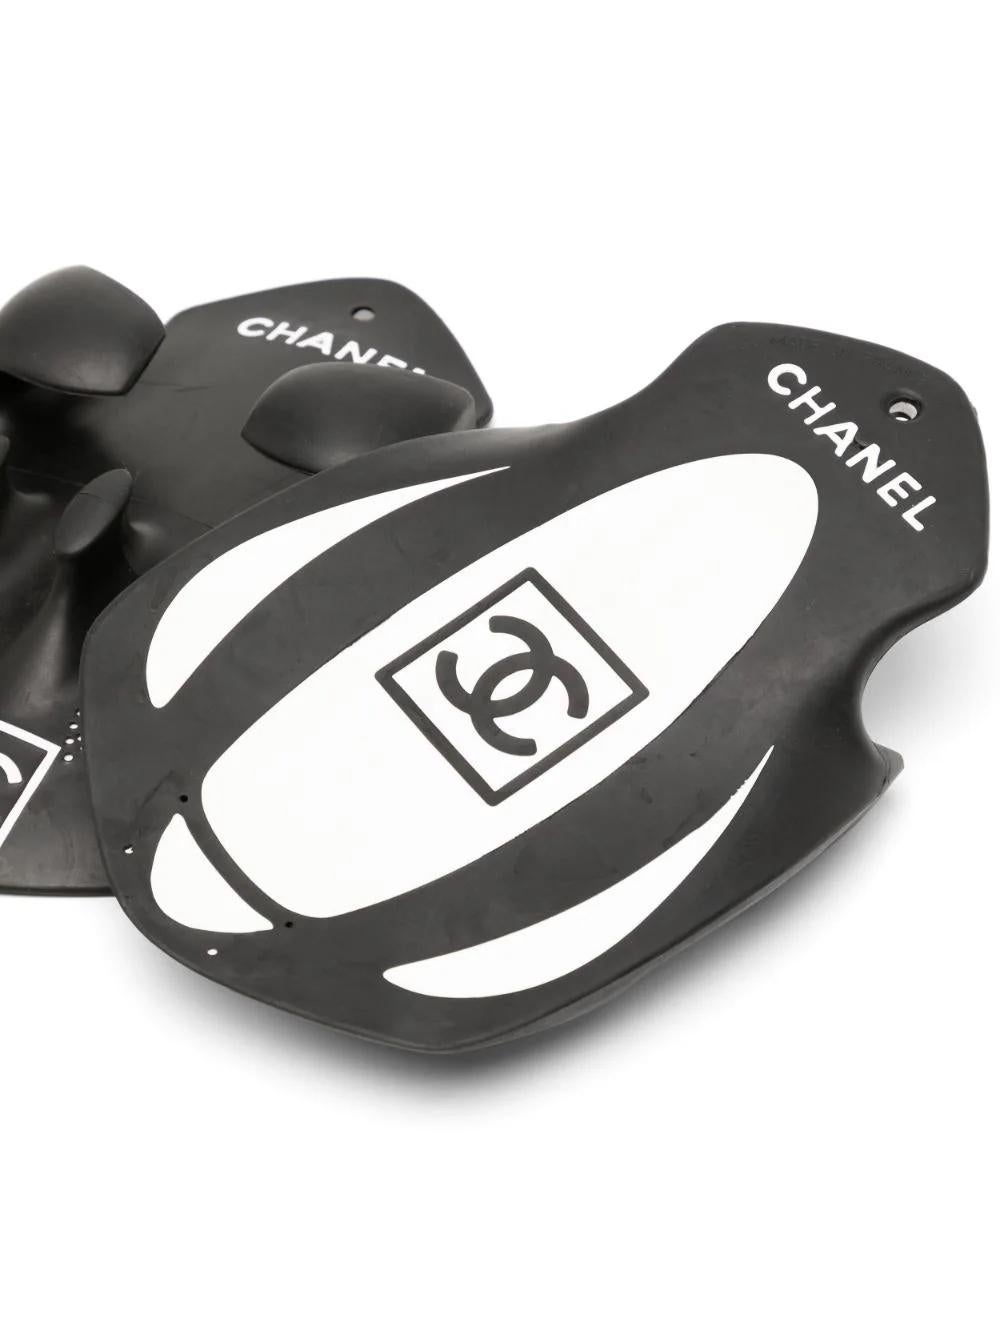 Crafted in France from a blend of charcoal black synthetic rubber and Thermoplastic Polyurethane, this pair of pre-owned, limited edition swimming peddlers by Chanel features its iconic interlocking CC logo and 'Chanel' motif on both the front and